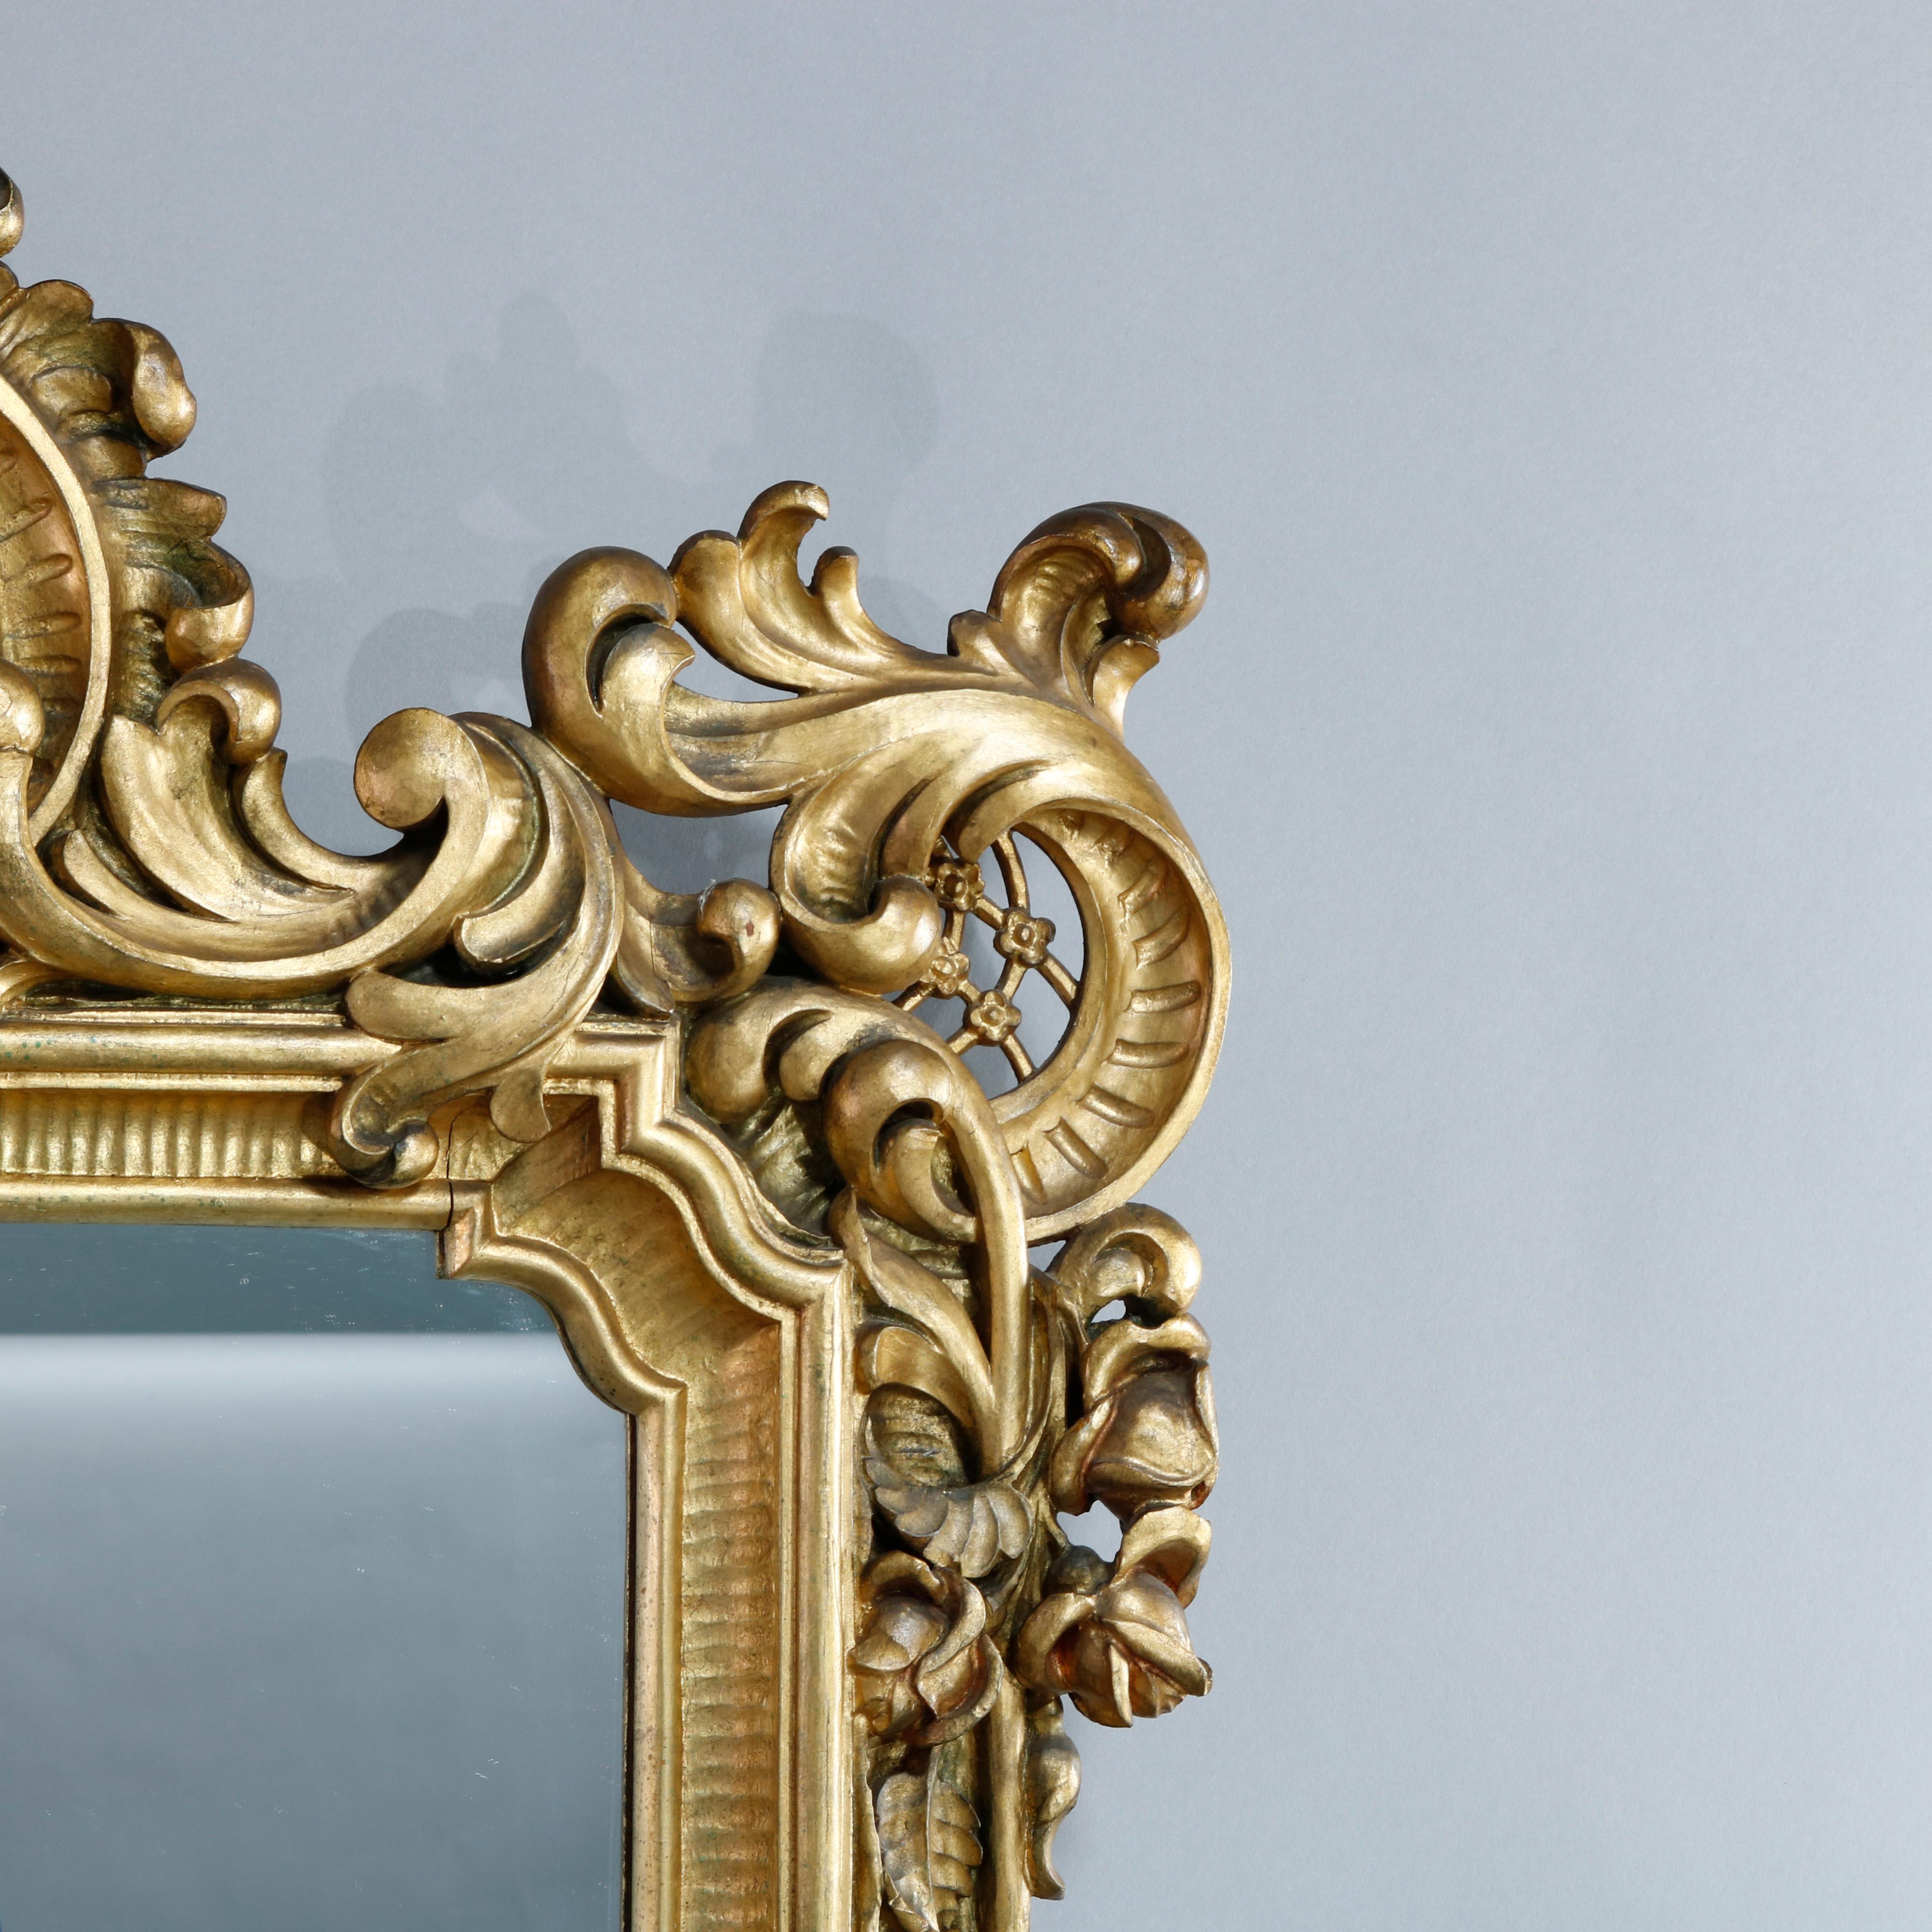 20th Century Antique Ornate French Louis XIV Style Giltwood Wall Mirror, Circa 1900